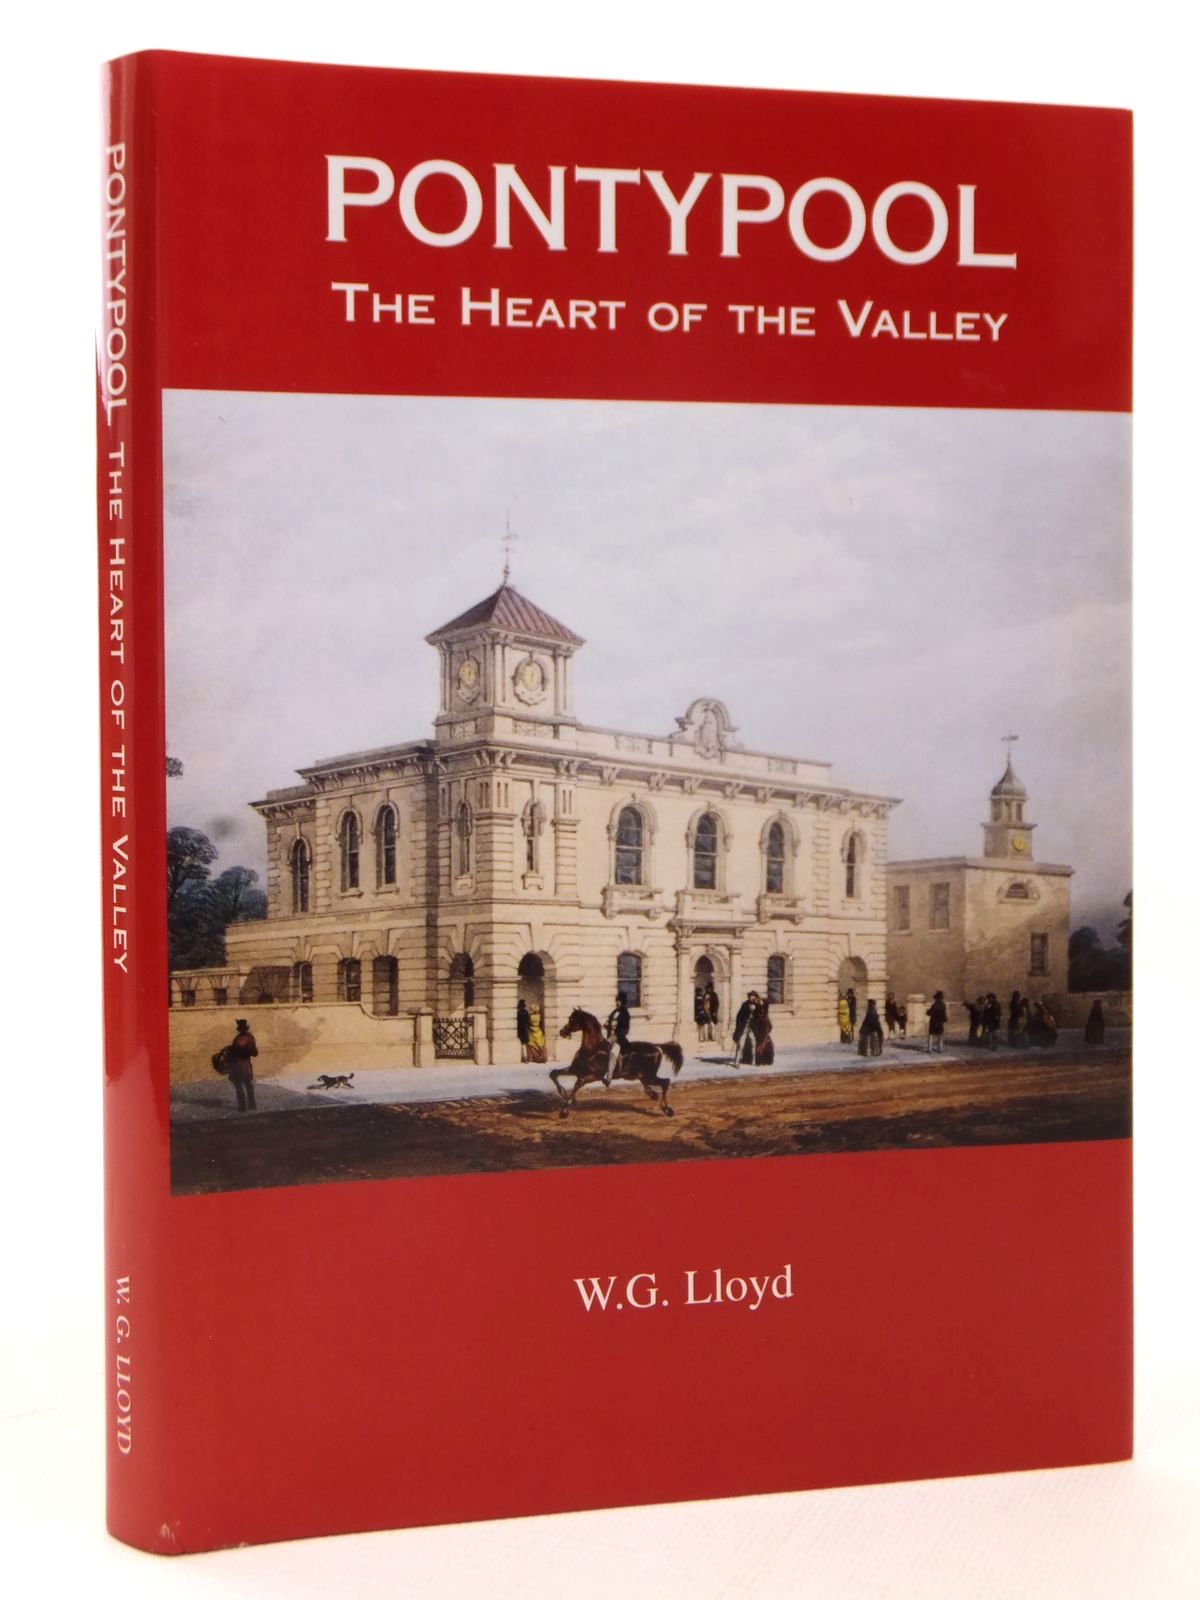 Photo of PONTYPOOL THE HEART OF THE VALLEY written by Lloyd, W.G. published by W.G. Lloyd (STOCK CODE: 1609267)  for sale by Stella & Rose's Books